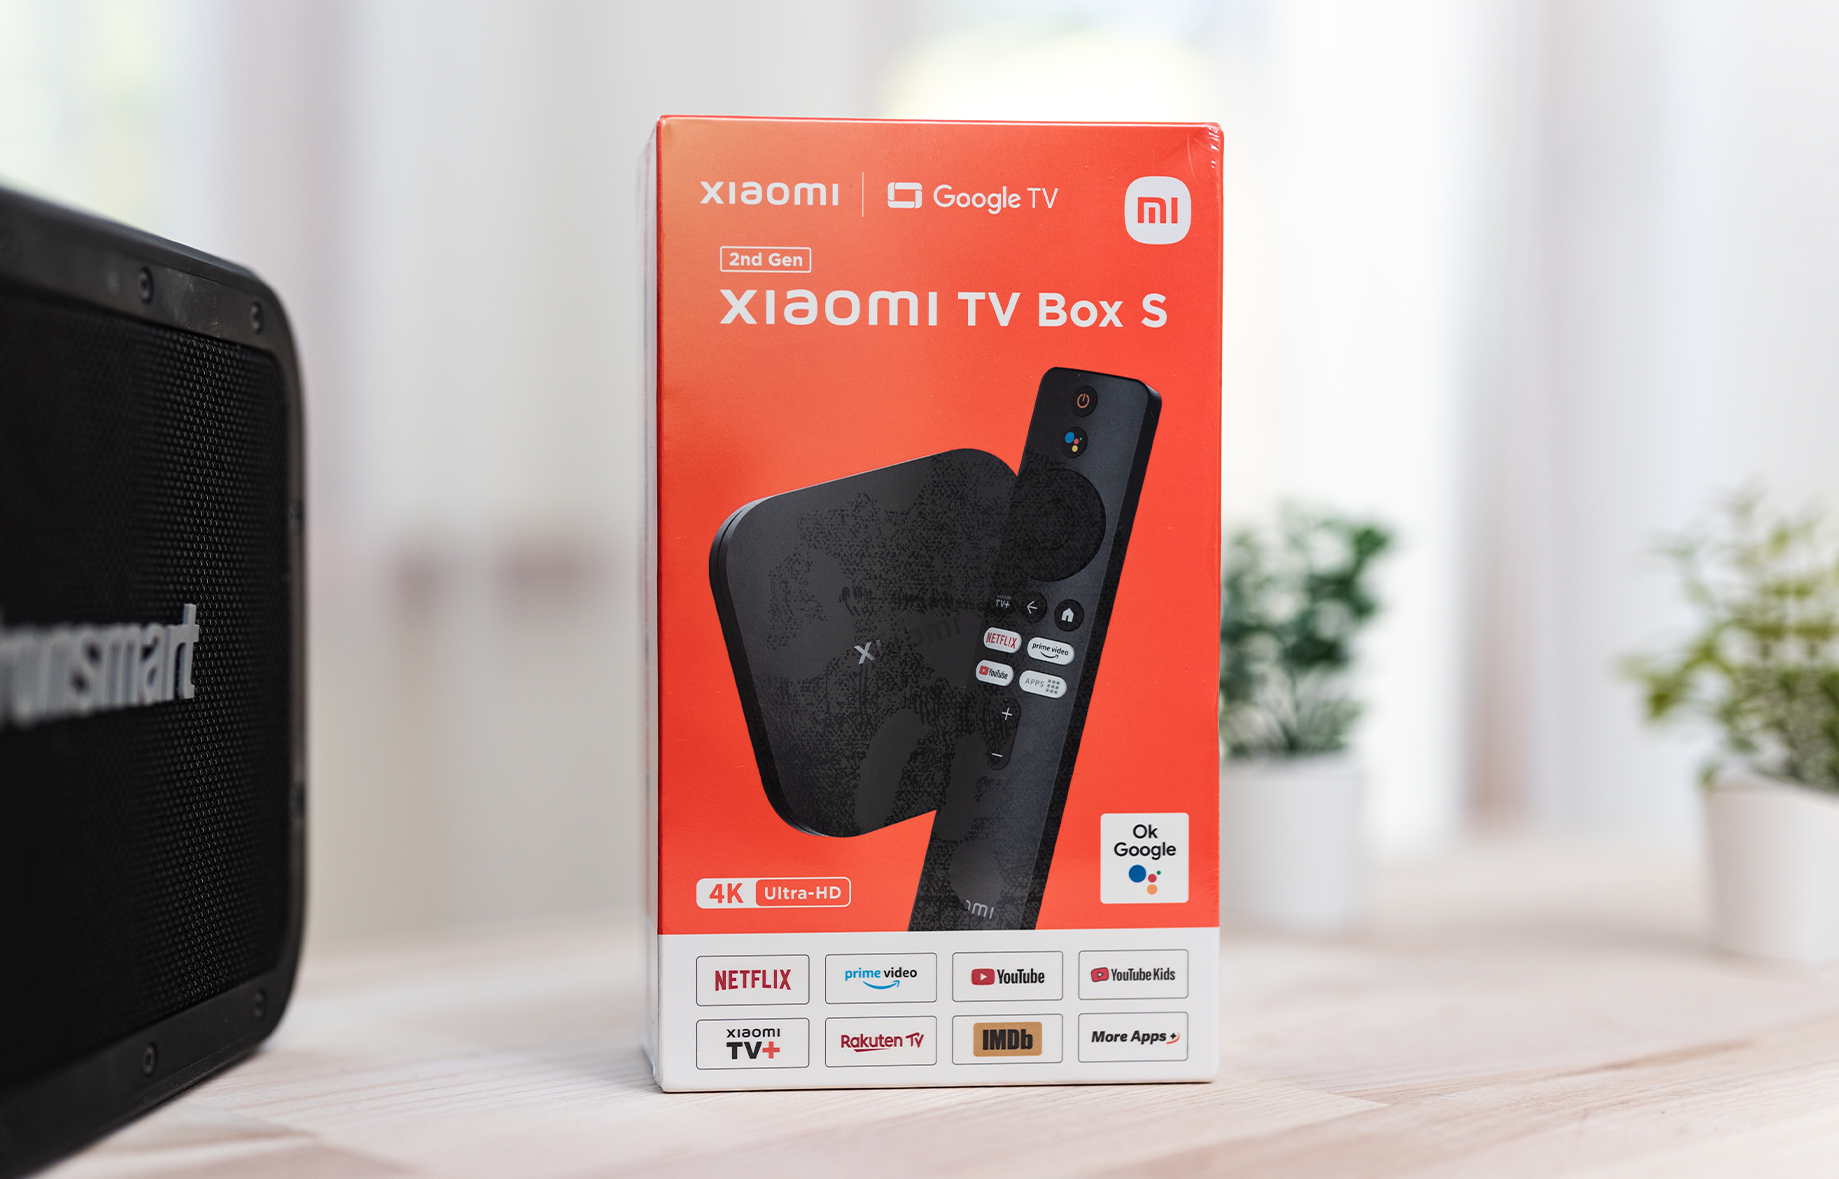 Xiaomi TV Box S 2nd Gen Review  4K Google TV Streaming Box (HDR10 / Dolby  Vision) 